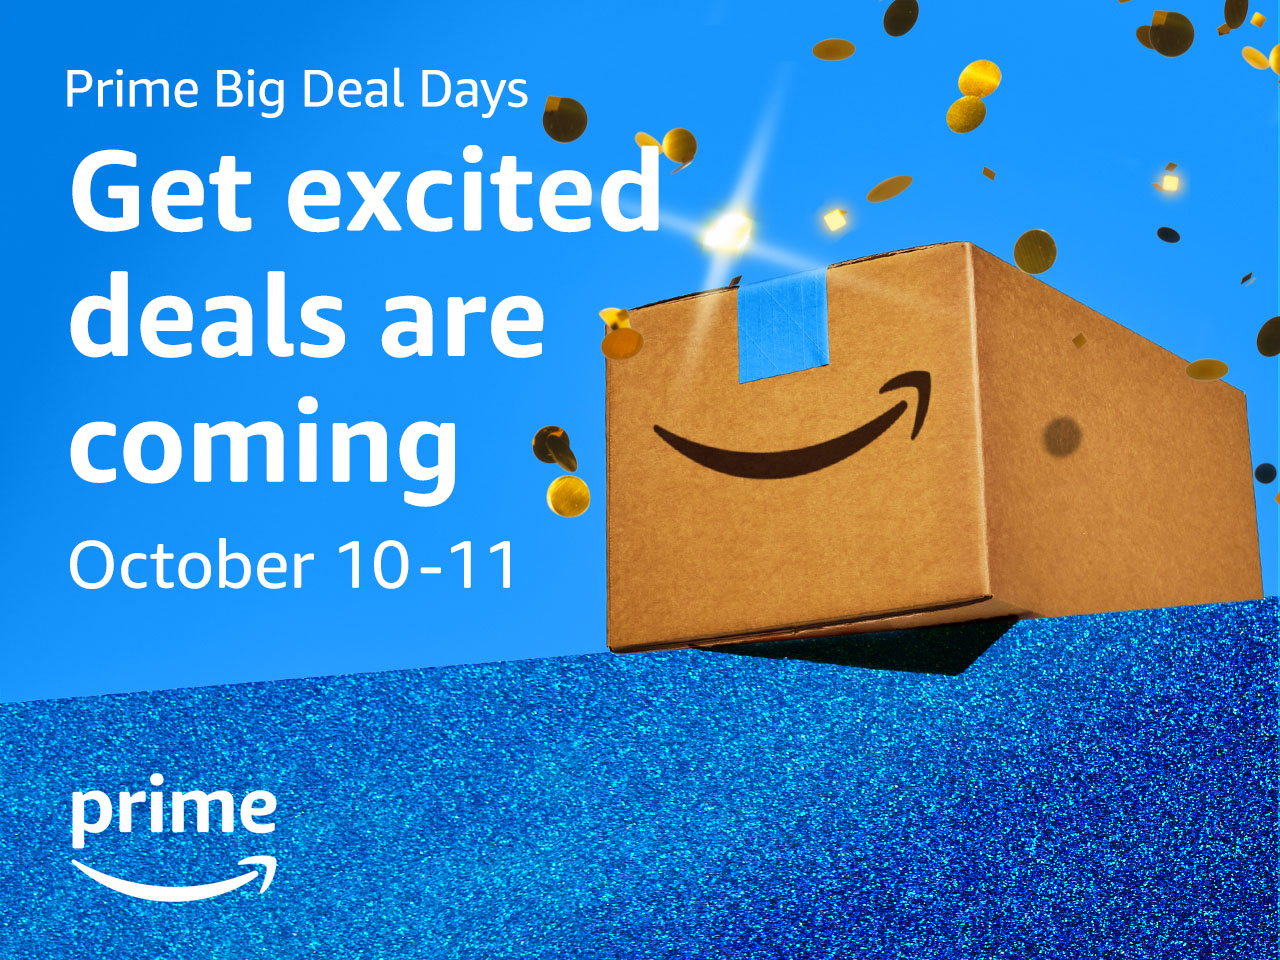 How big will Prime Big Deals Day be?